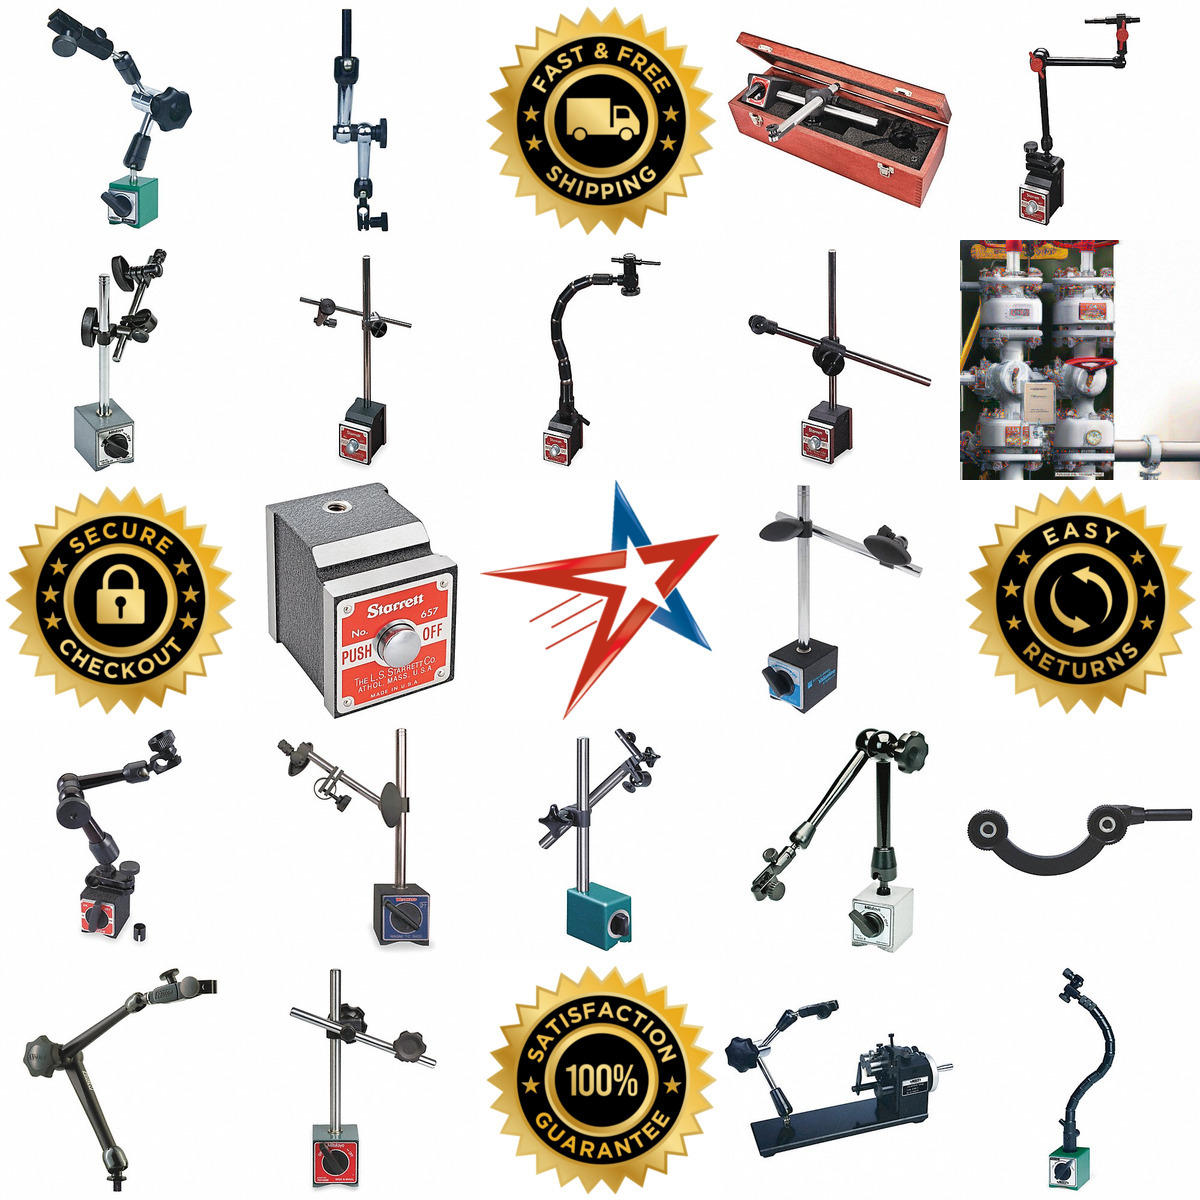 A selection of Indicator Holders and Bases products on GoVets